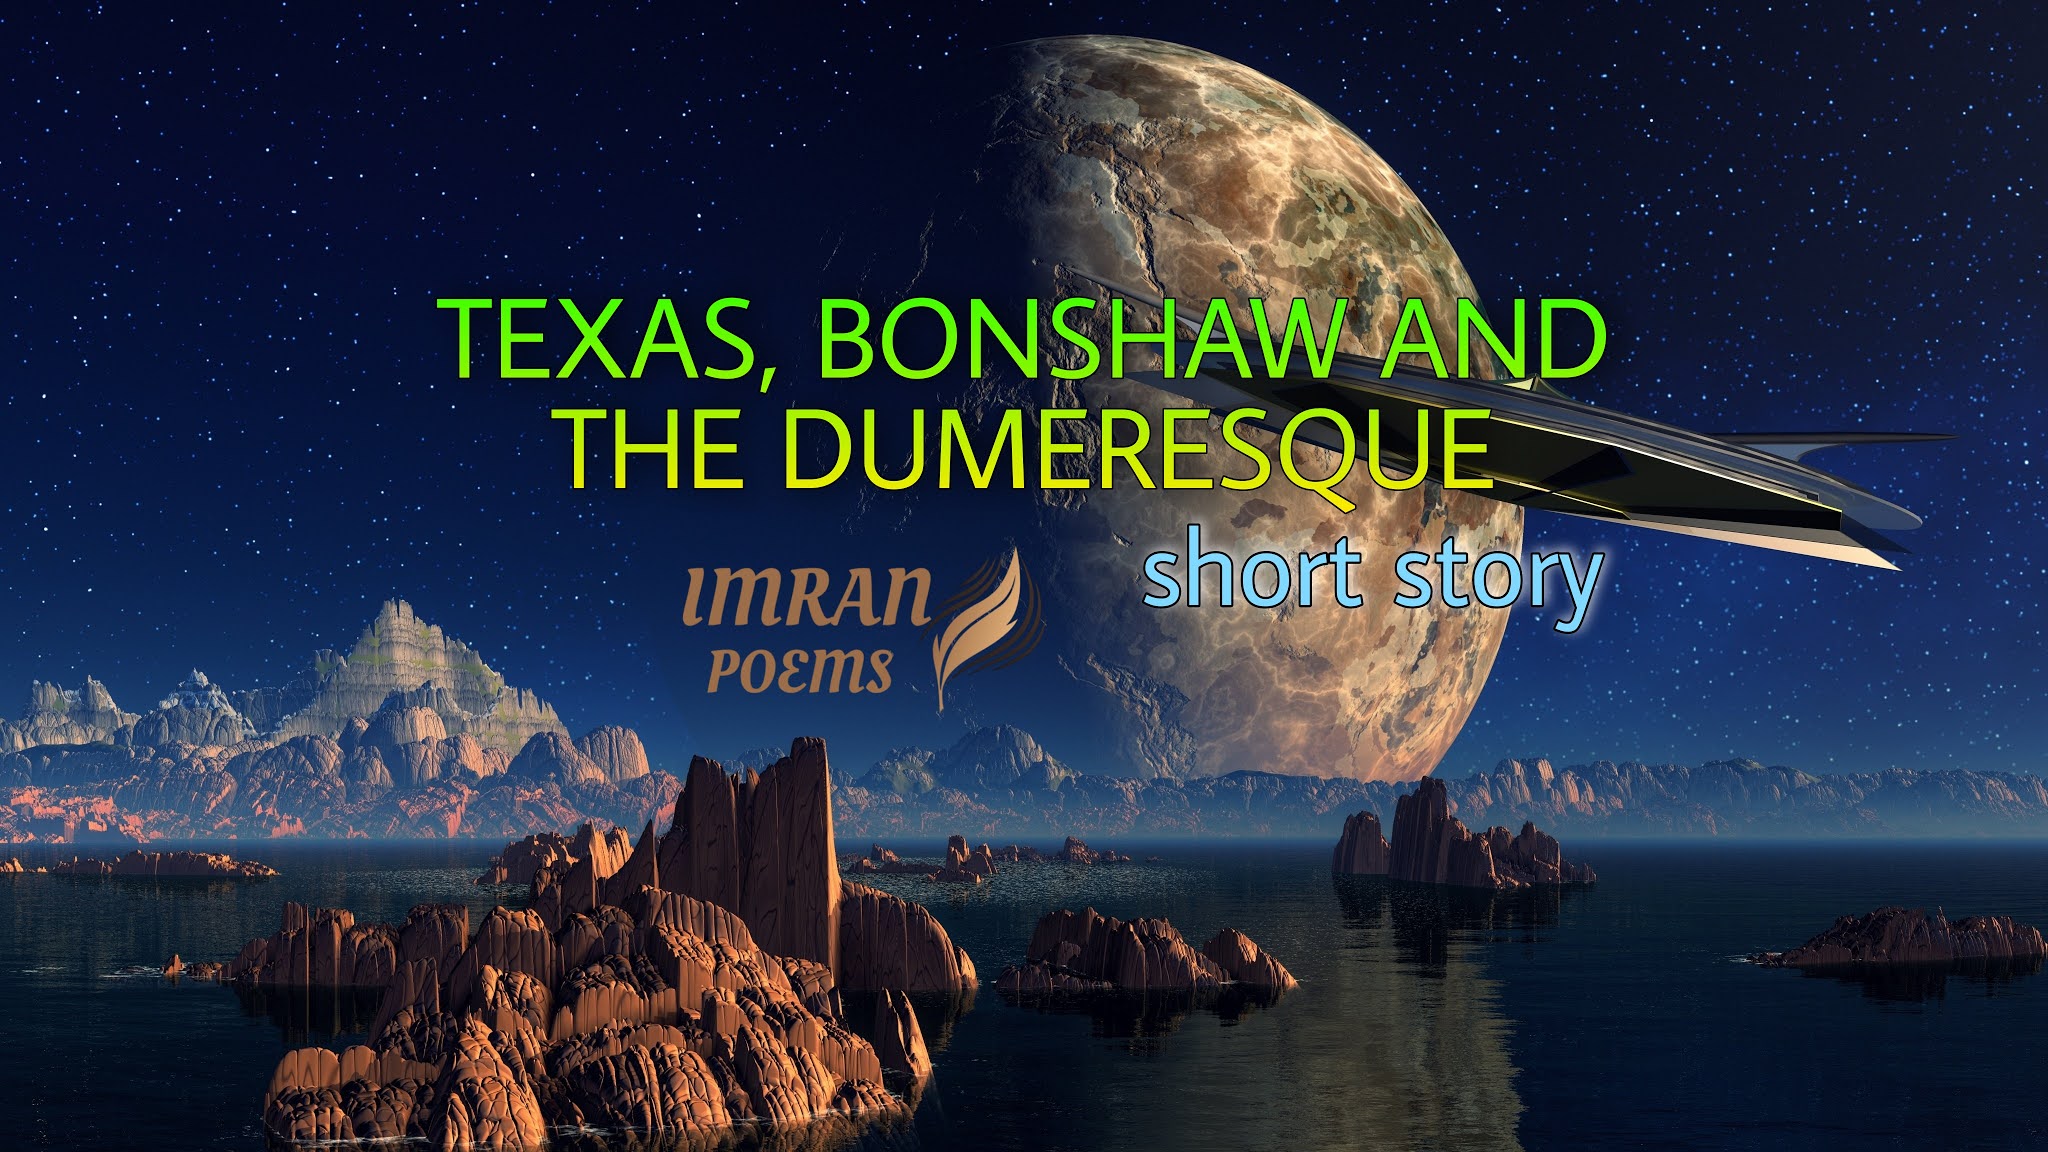 TEXAS, BONSHAW AND THE DUMERESQUE (short story)